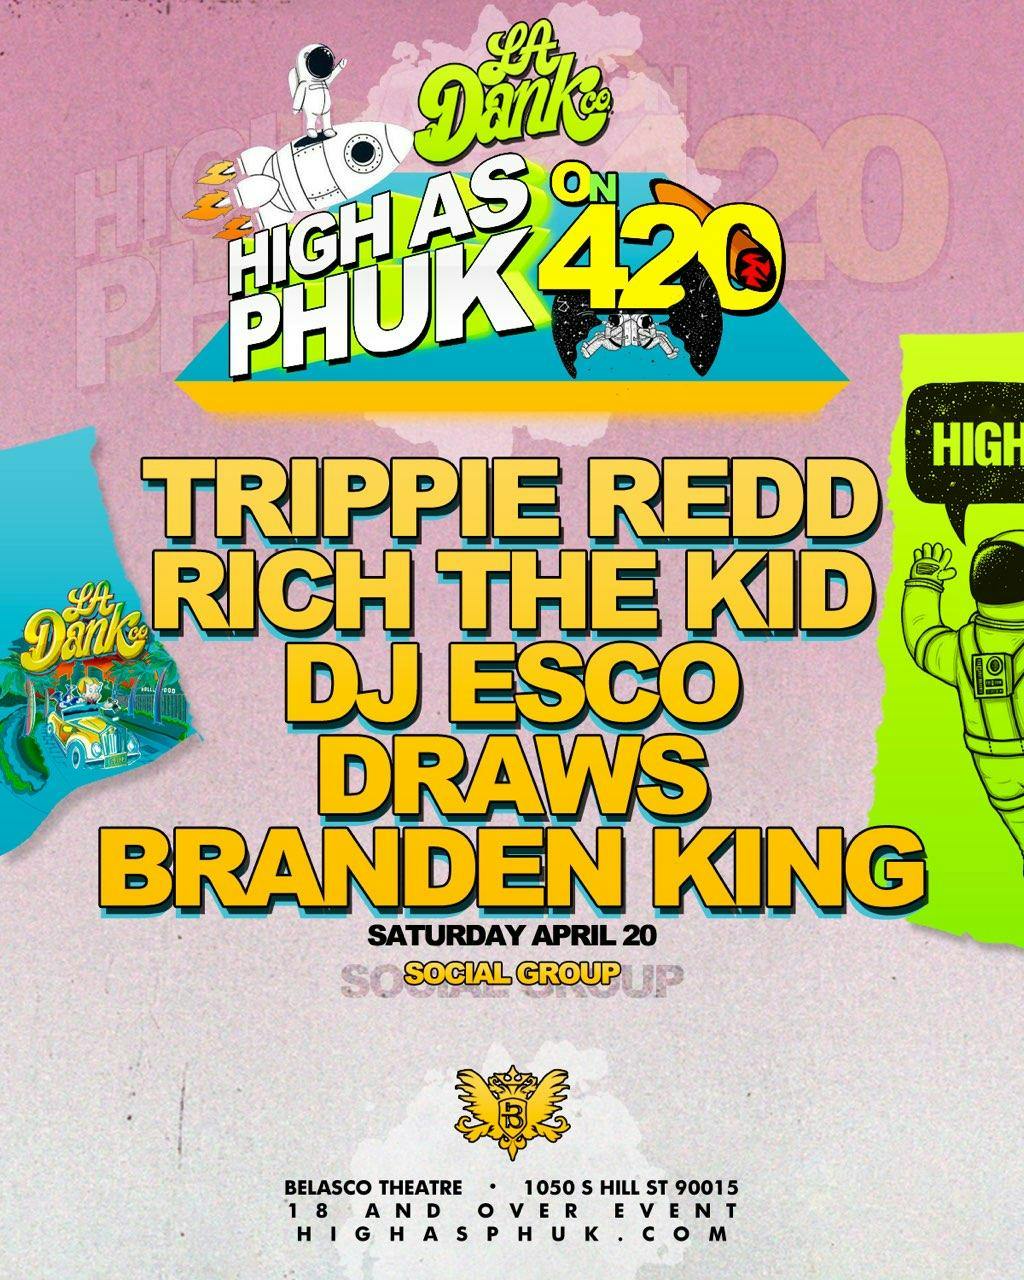 High as PHUK on 420 with Trippie Redd + Dj Esco + Joe Moses & Special Guest